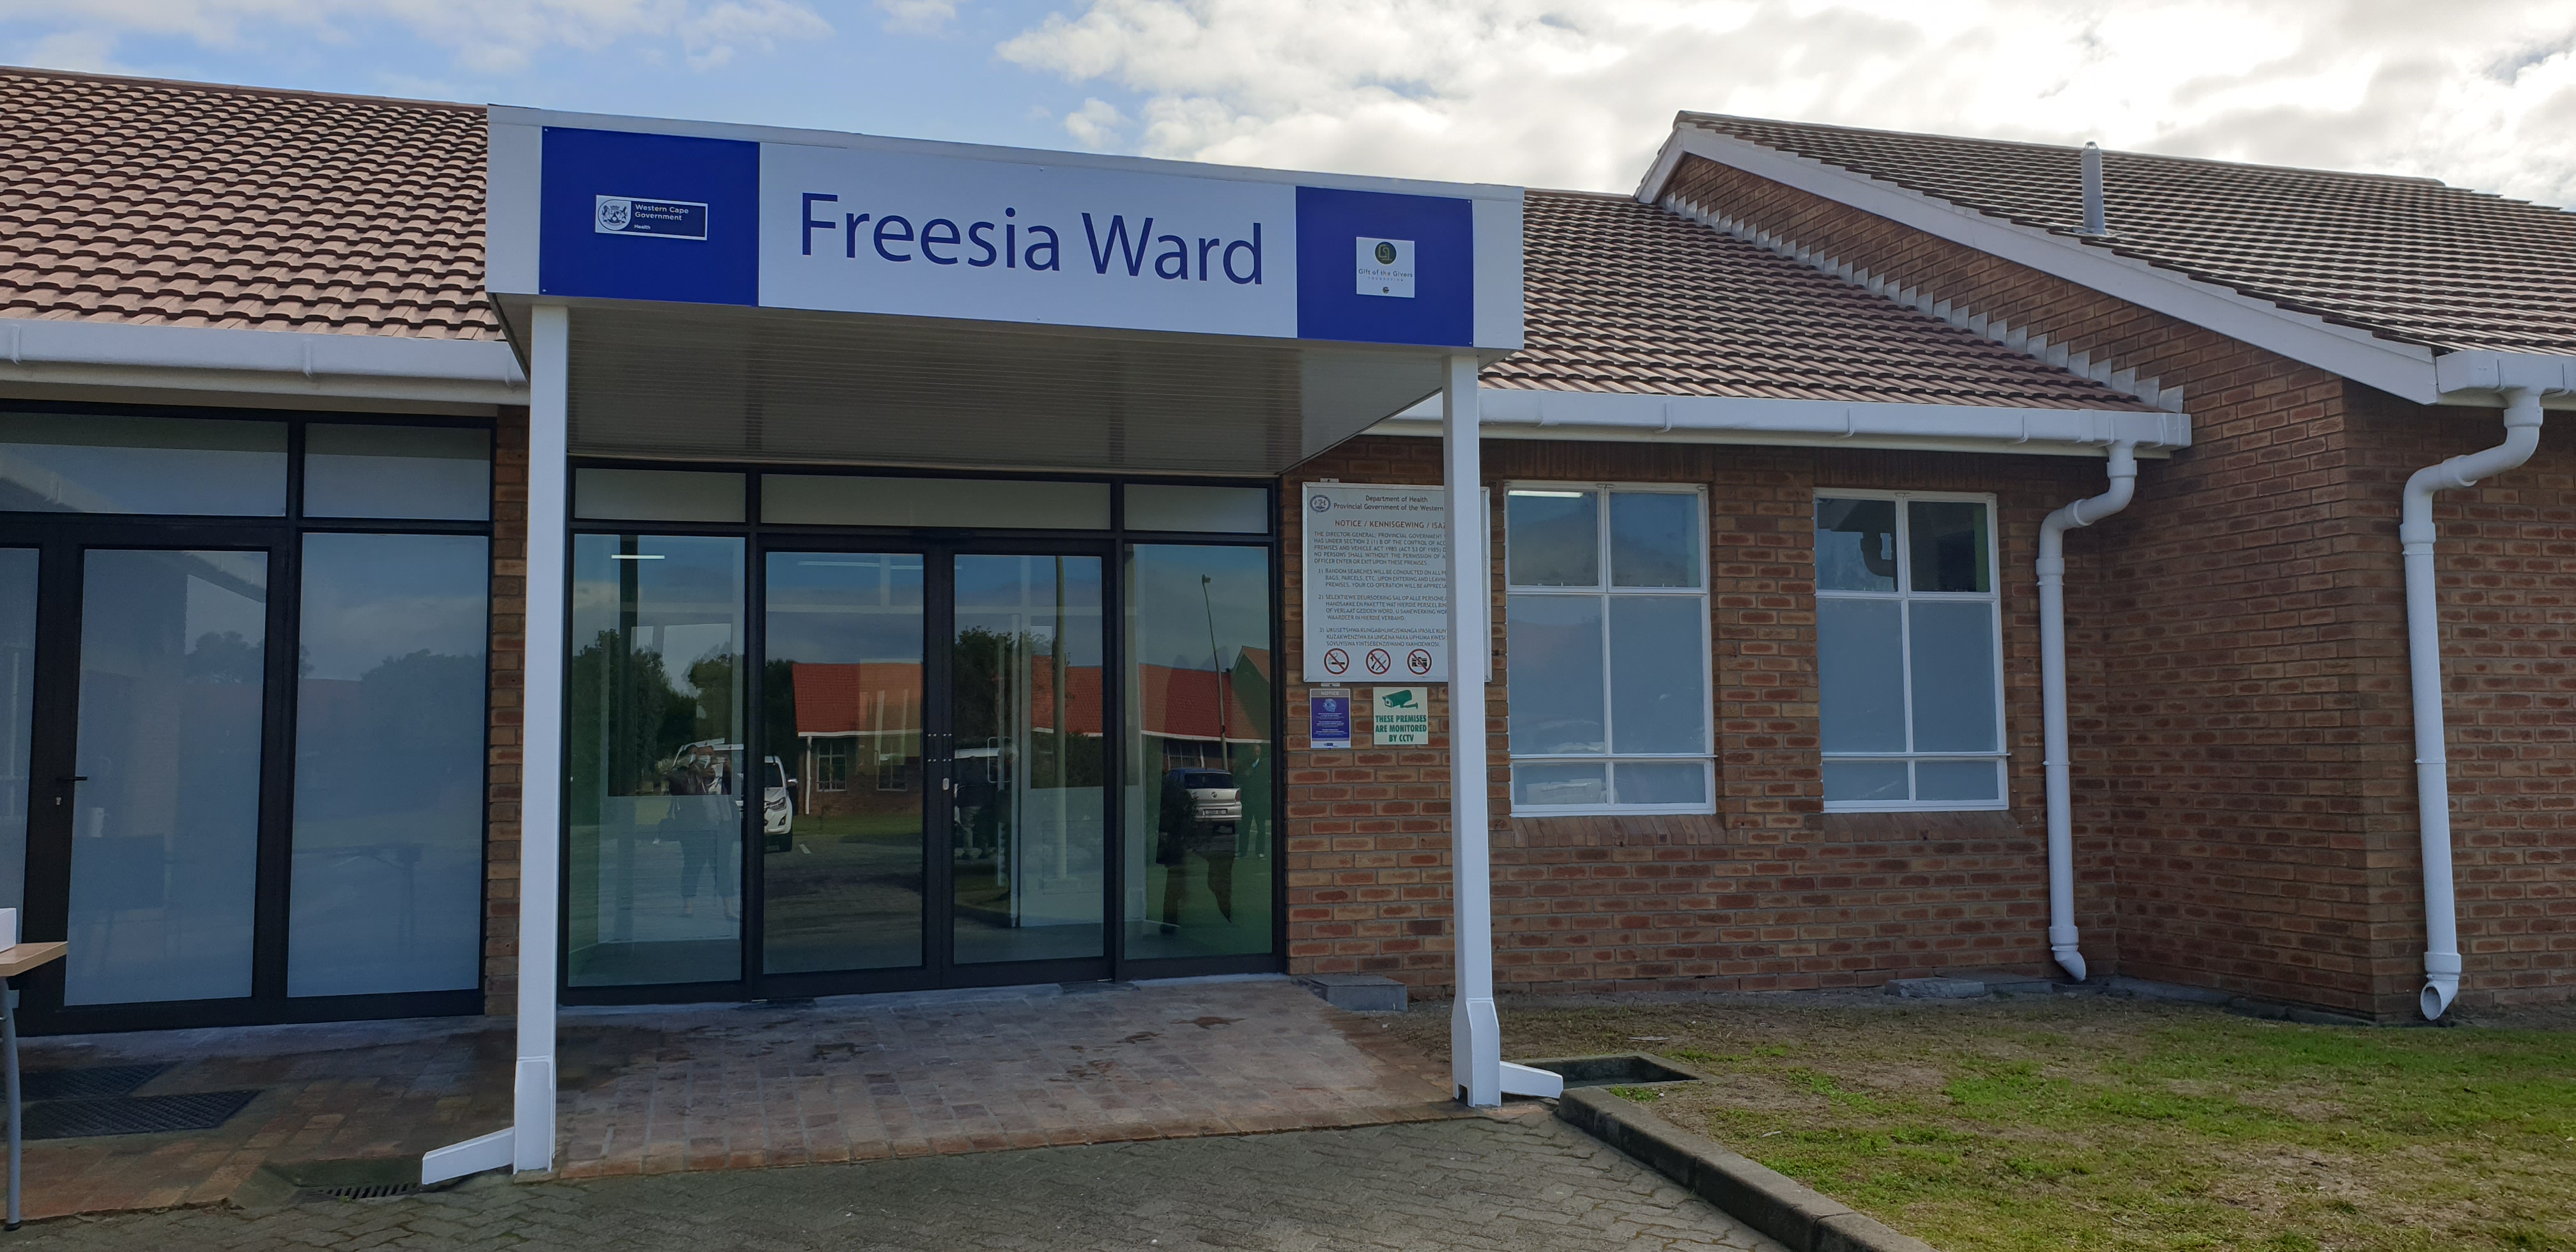 R10 million renovated ward for care of COVID-19 patients in Mitchells Plain 